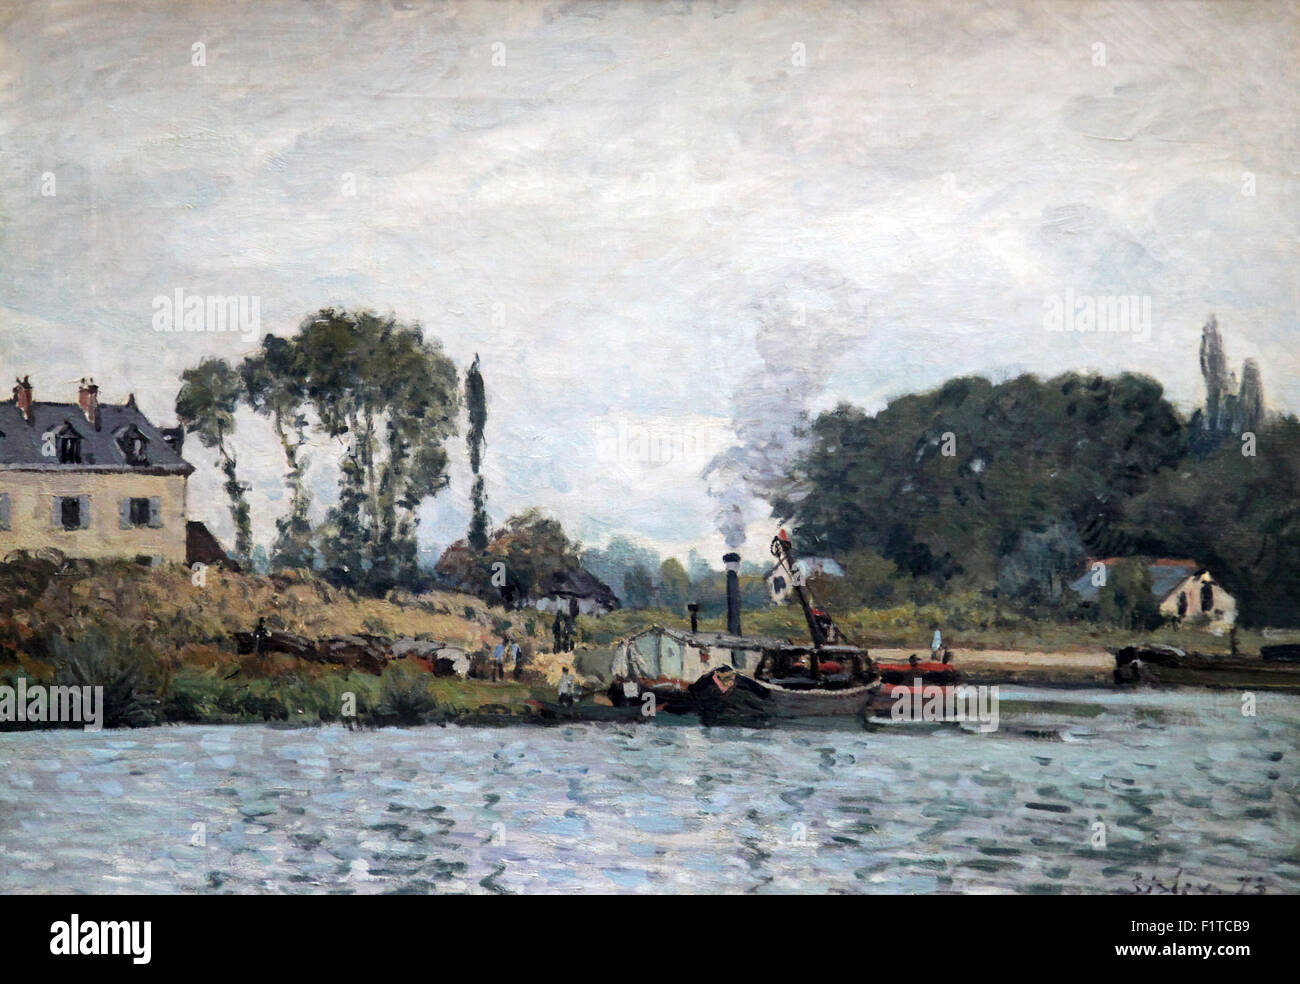 Boats at the lock at Bougival 1873 by Alfred Sisley 1839-1899.Impressionist landscape painter born in France but with a British citizenship. Stock Photo